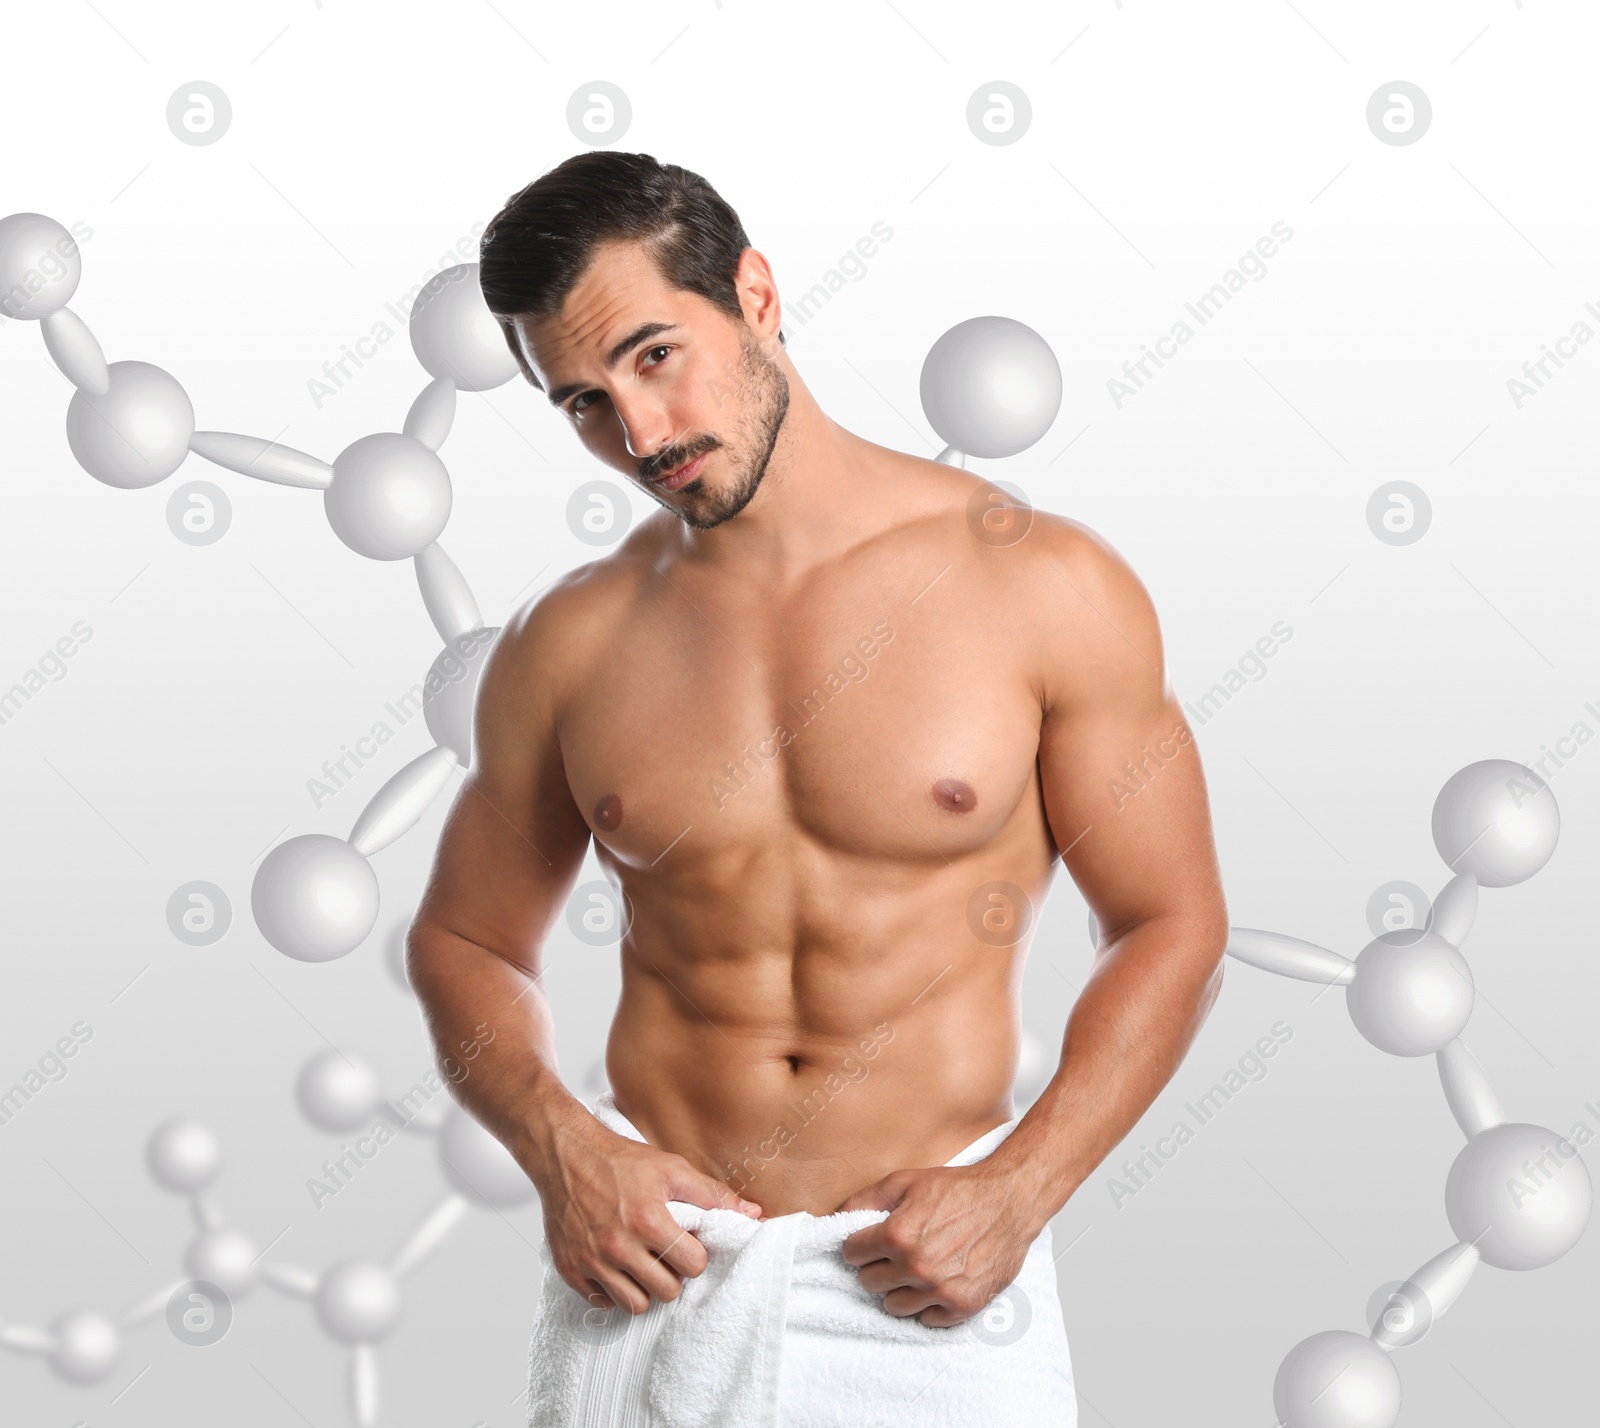 Image of Metabolism concept. Man with slim body and molecular chains on light background